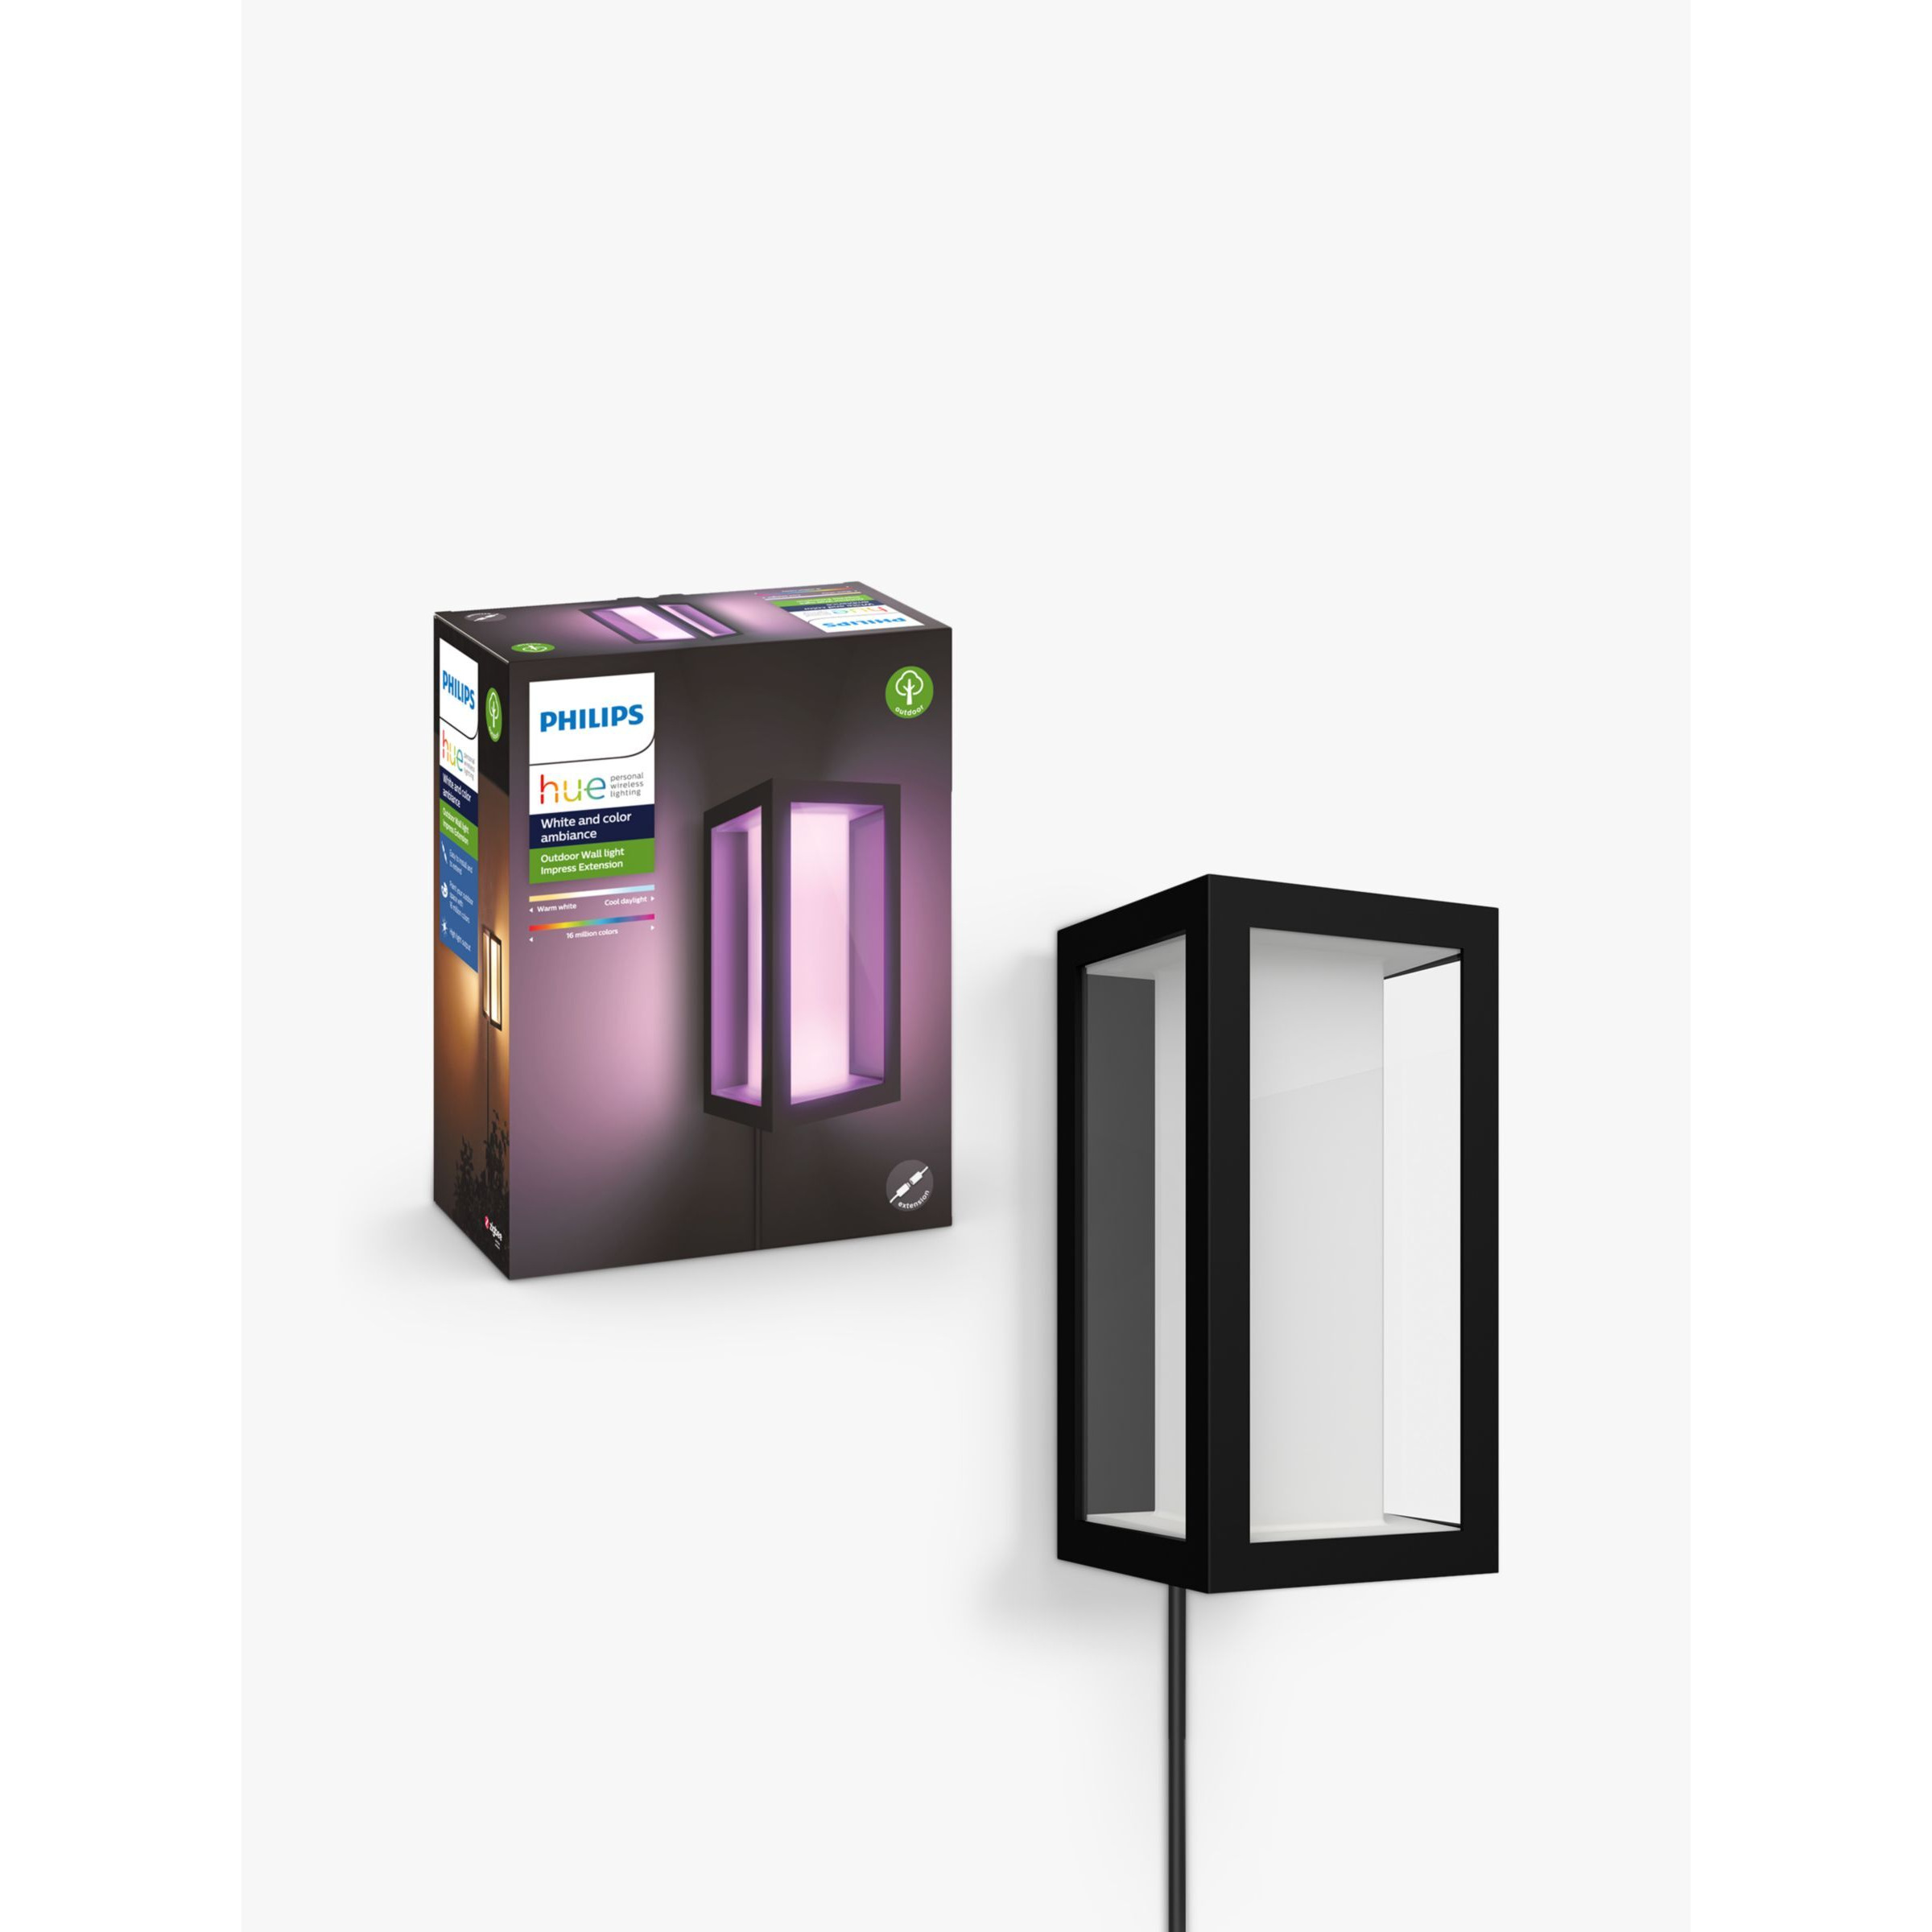 Philips Hue White and Colour Ambiance Impress LED Smart Plug In Outdoor Wall Light Extension, Black - image 1